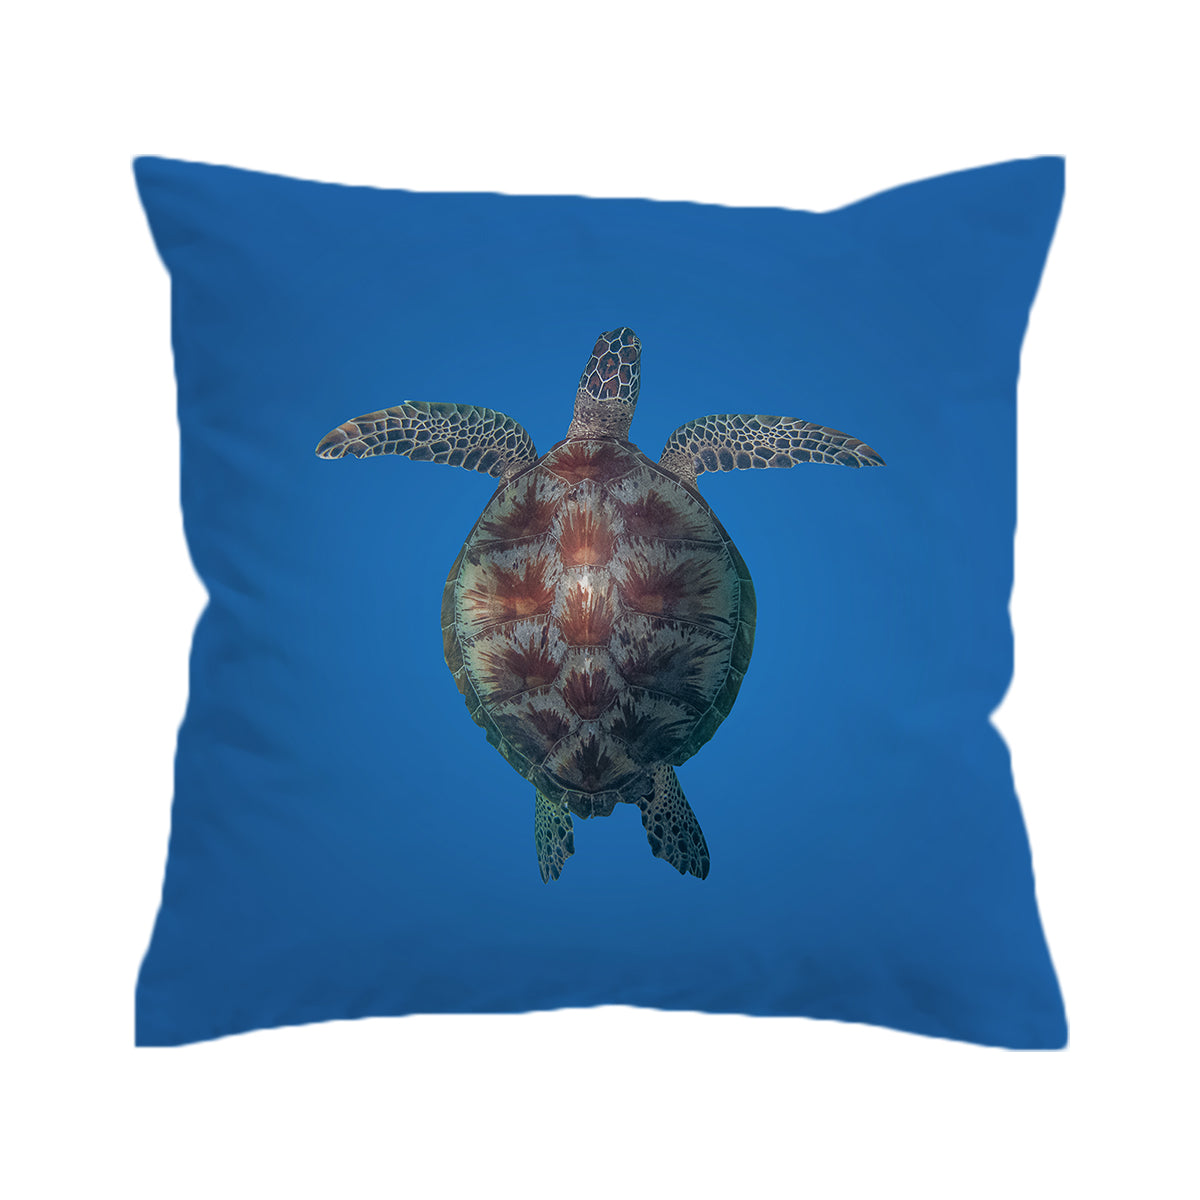 Turtle Pillow Cover